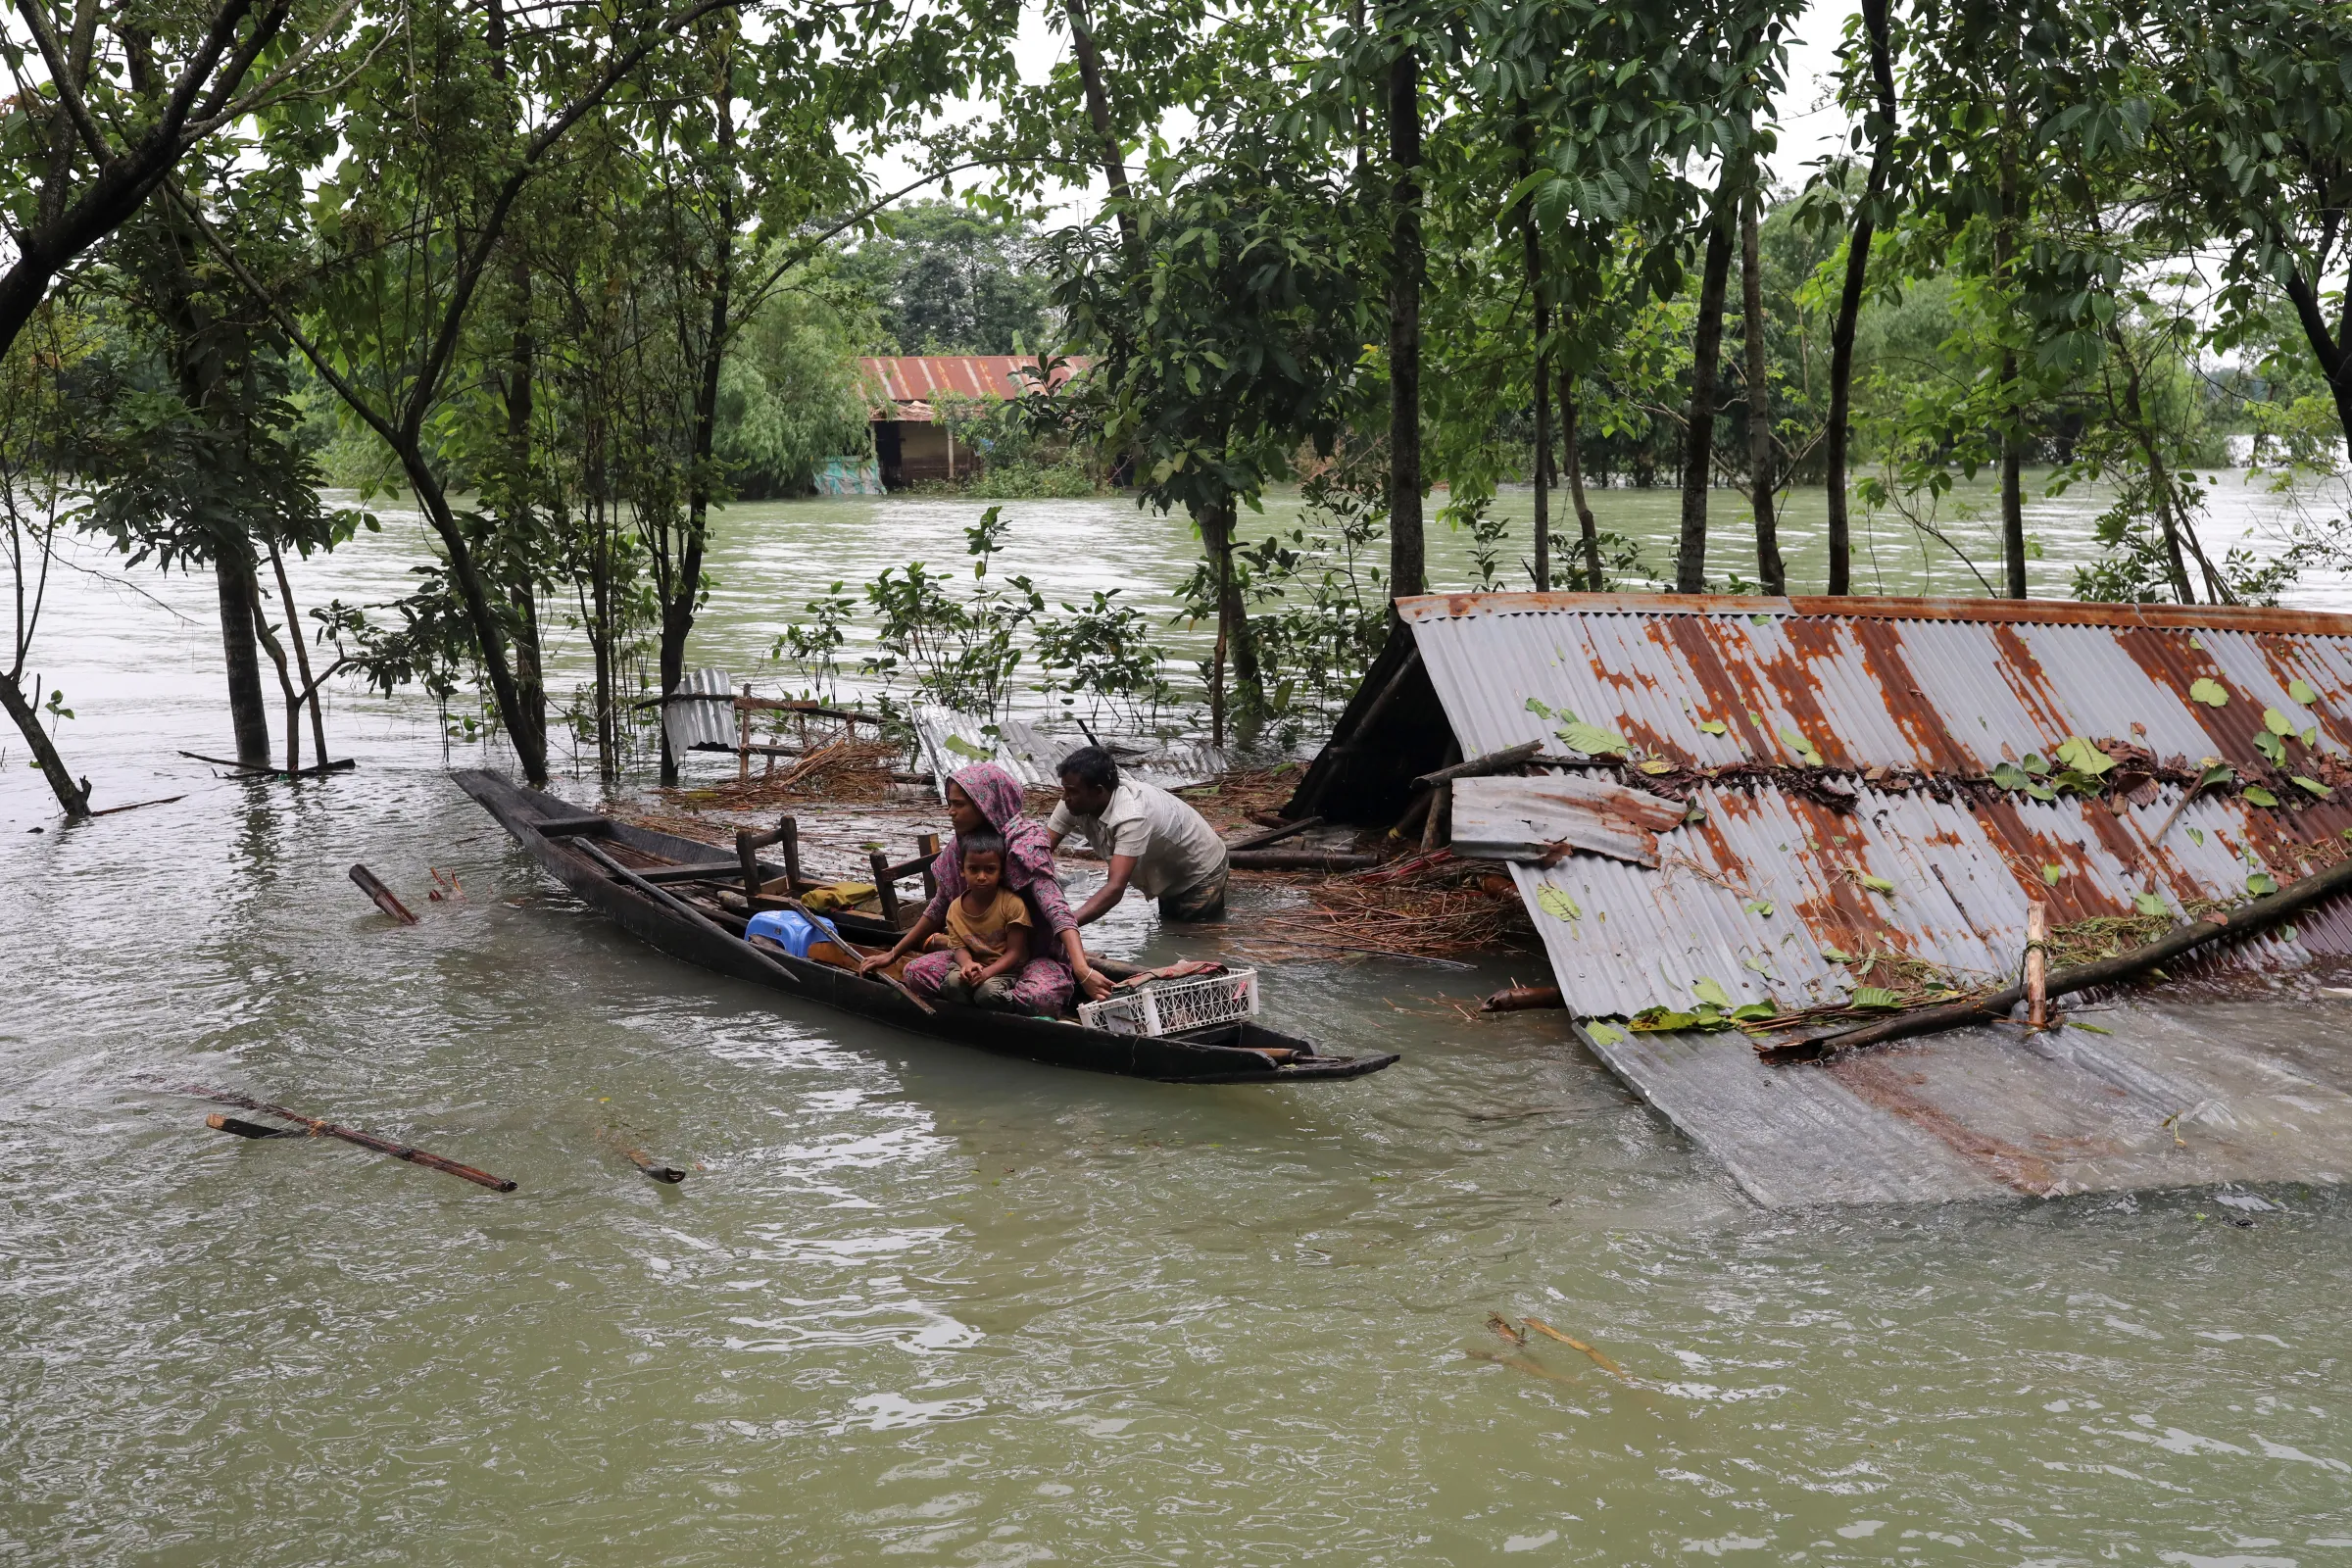 People get on a boat as they look for shelter during a widespread flood in the northeastern part of the country, in Sylhet, Bangladesh, June 19, 2022